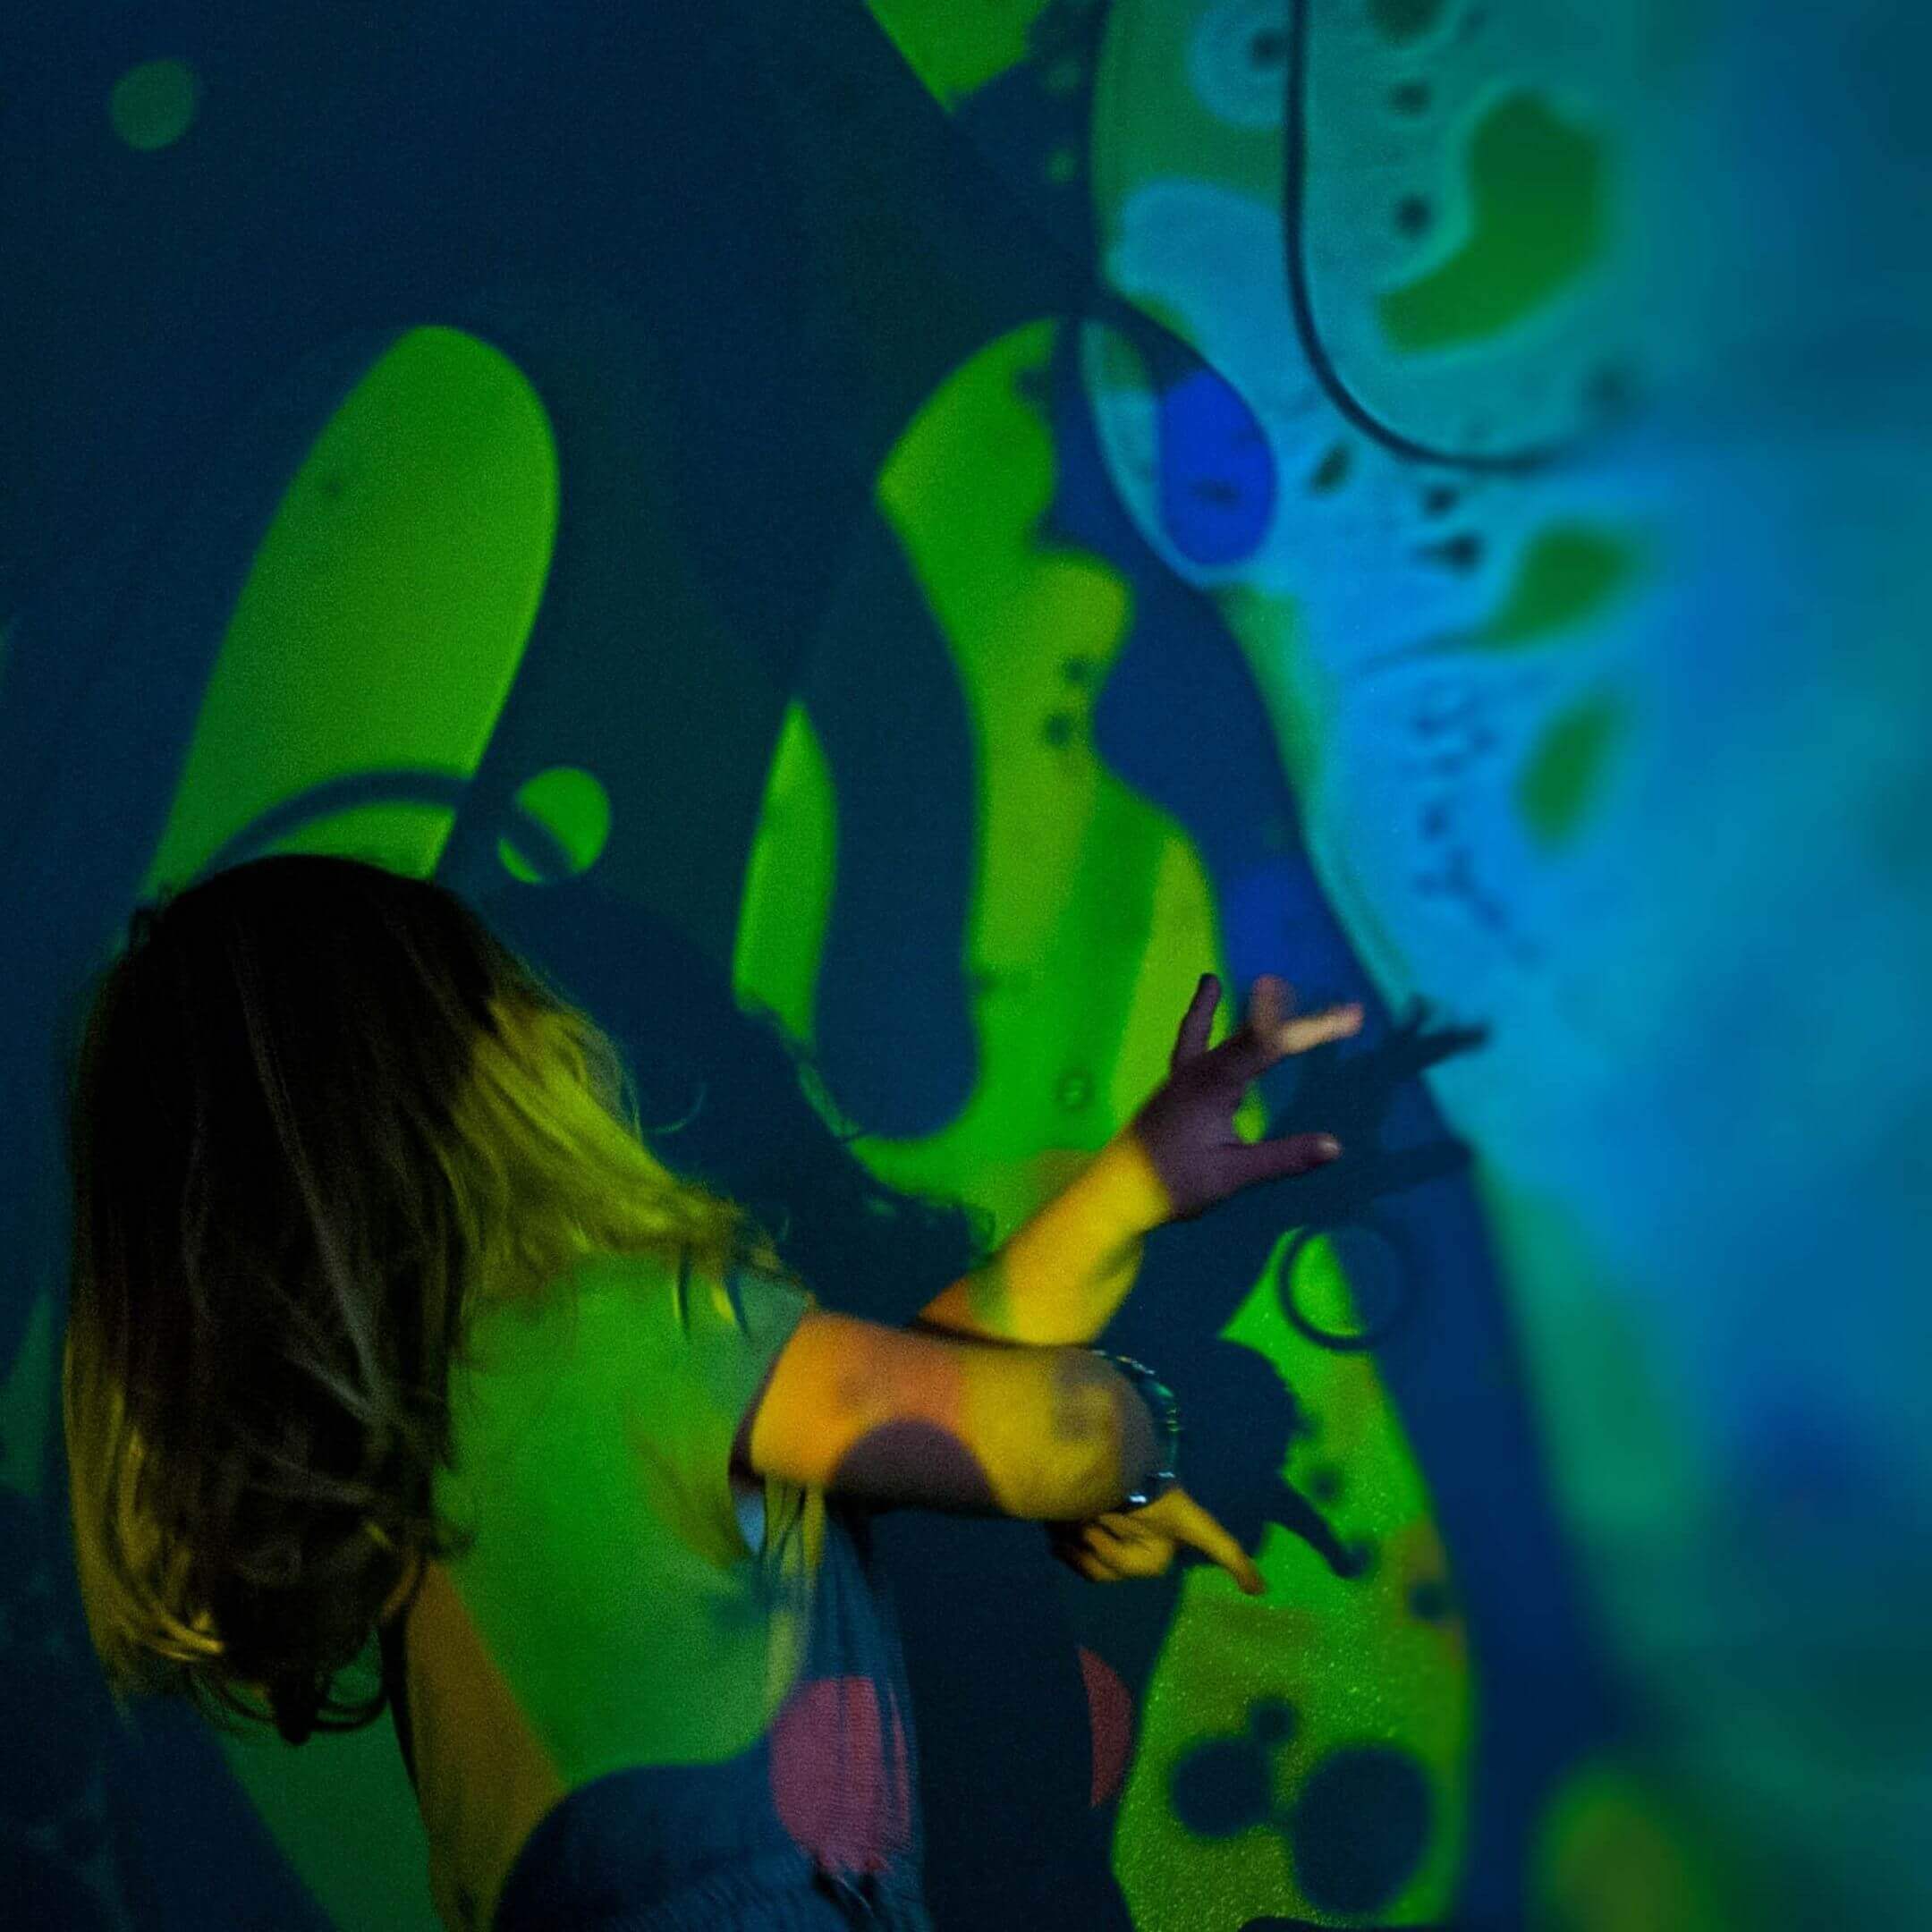 A child plays with the projected image from the Aura Sensory Light Projector.